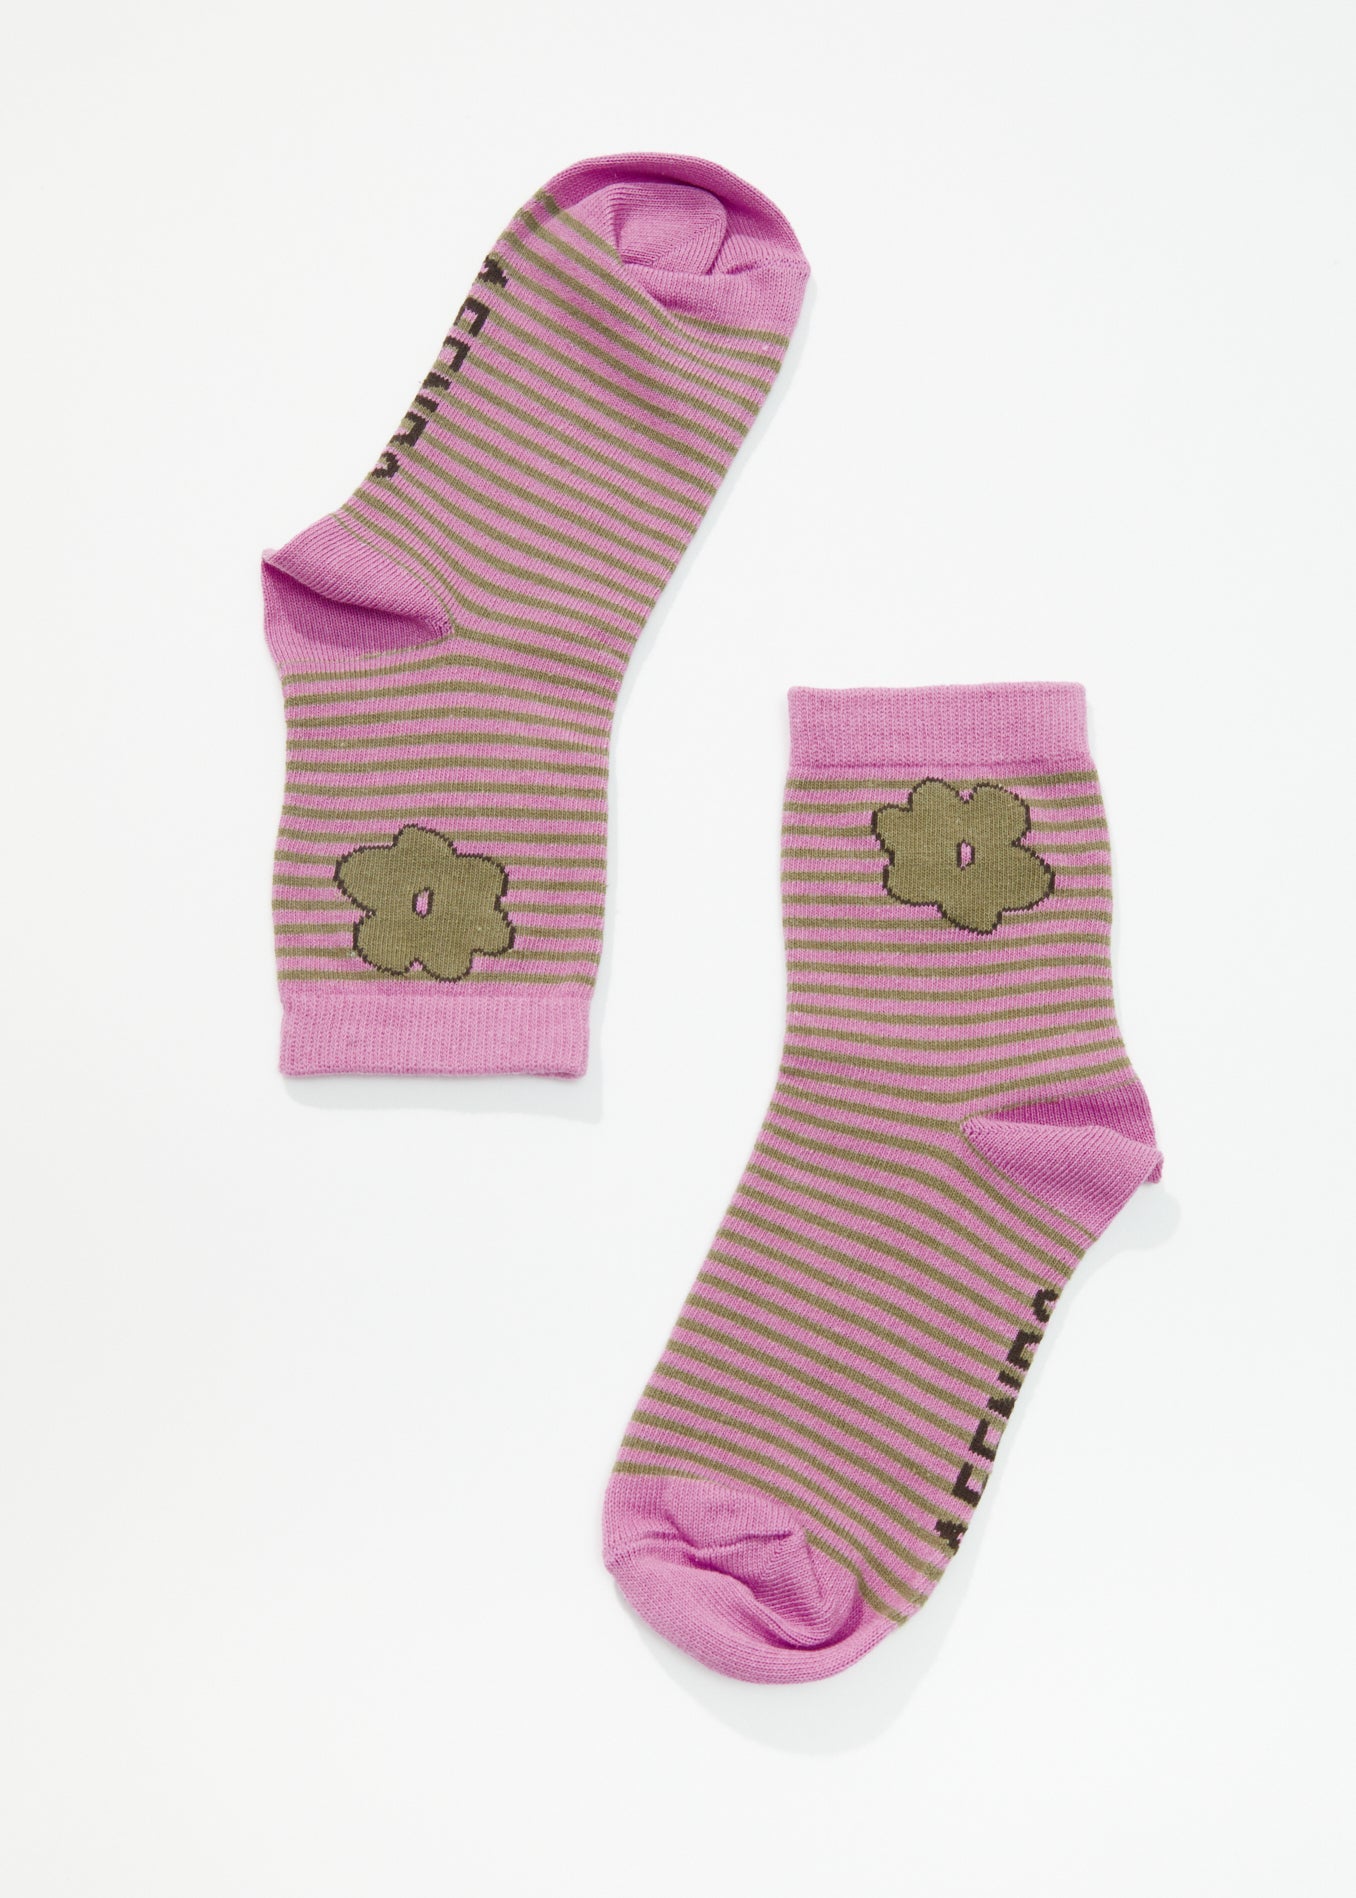 Afends Unisex Lily - Crew Socks - Candy A232666-CDY-OS